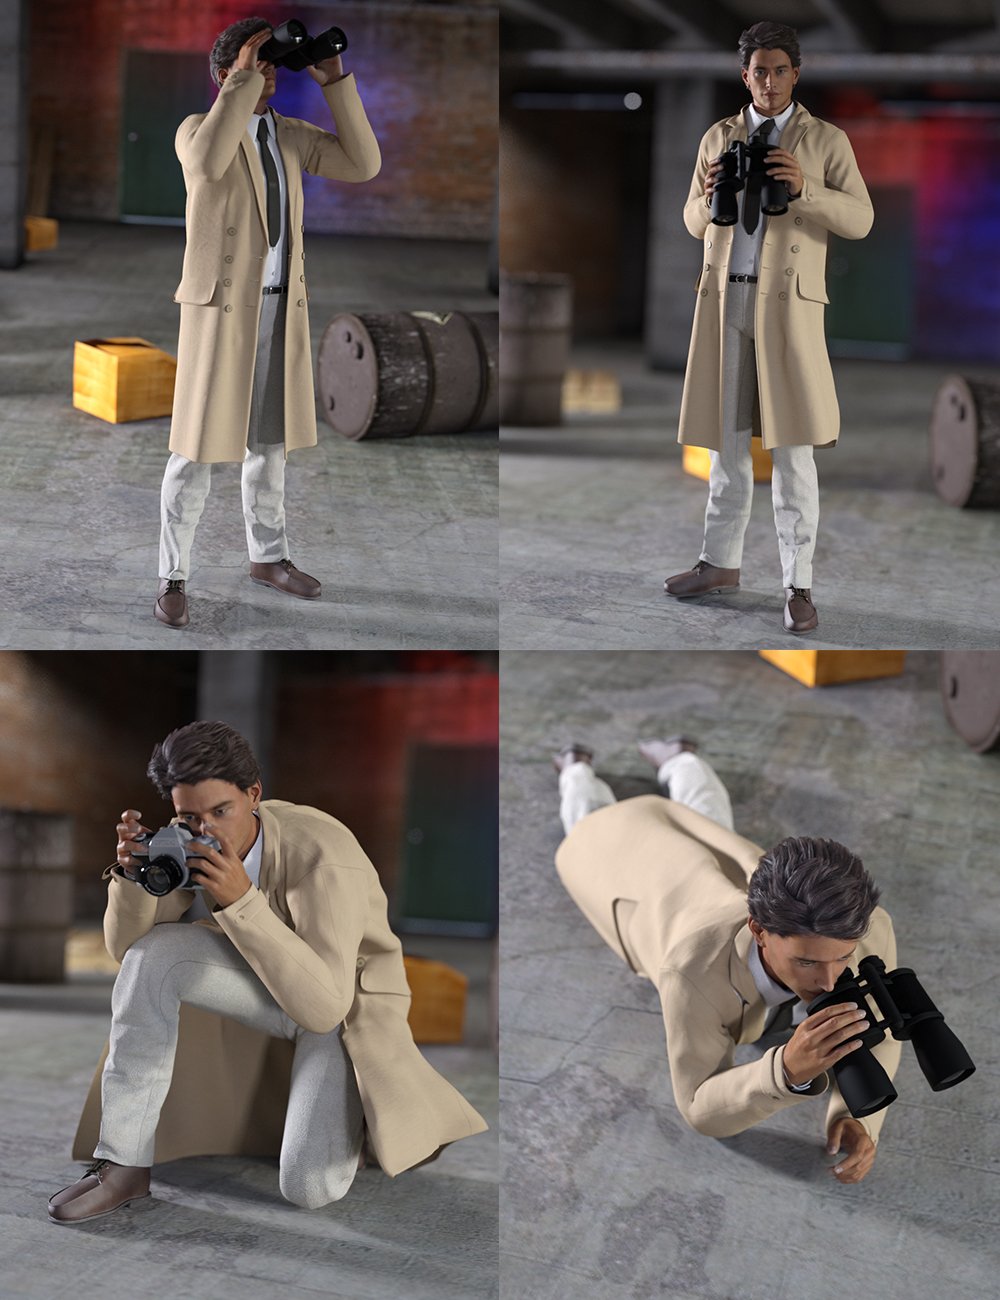 Detective Poses and Props by: Val3dart, 3D Models by Daz 3D